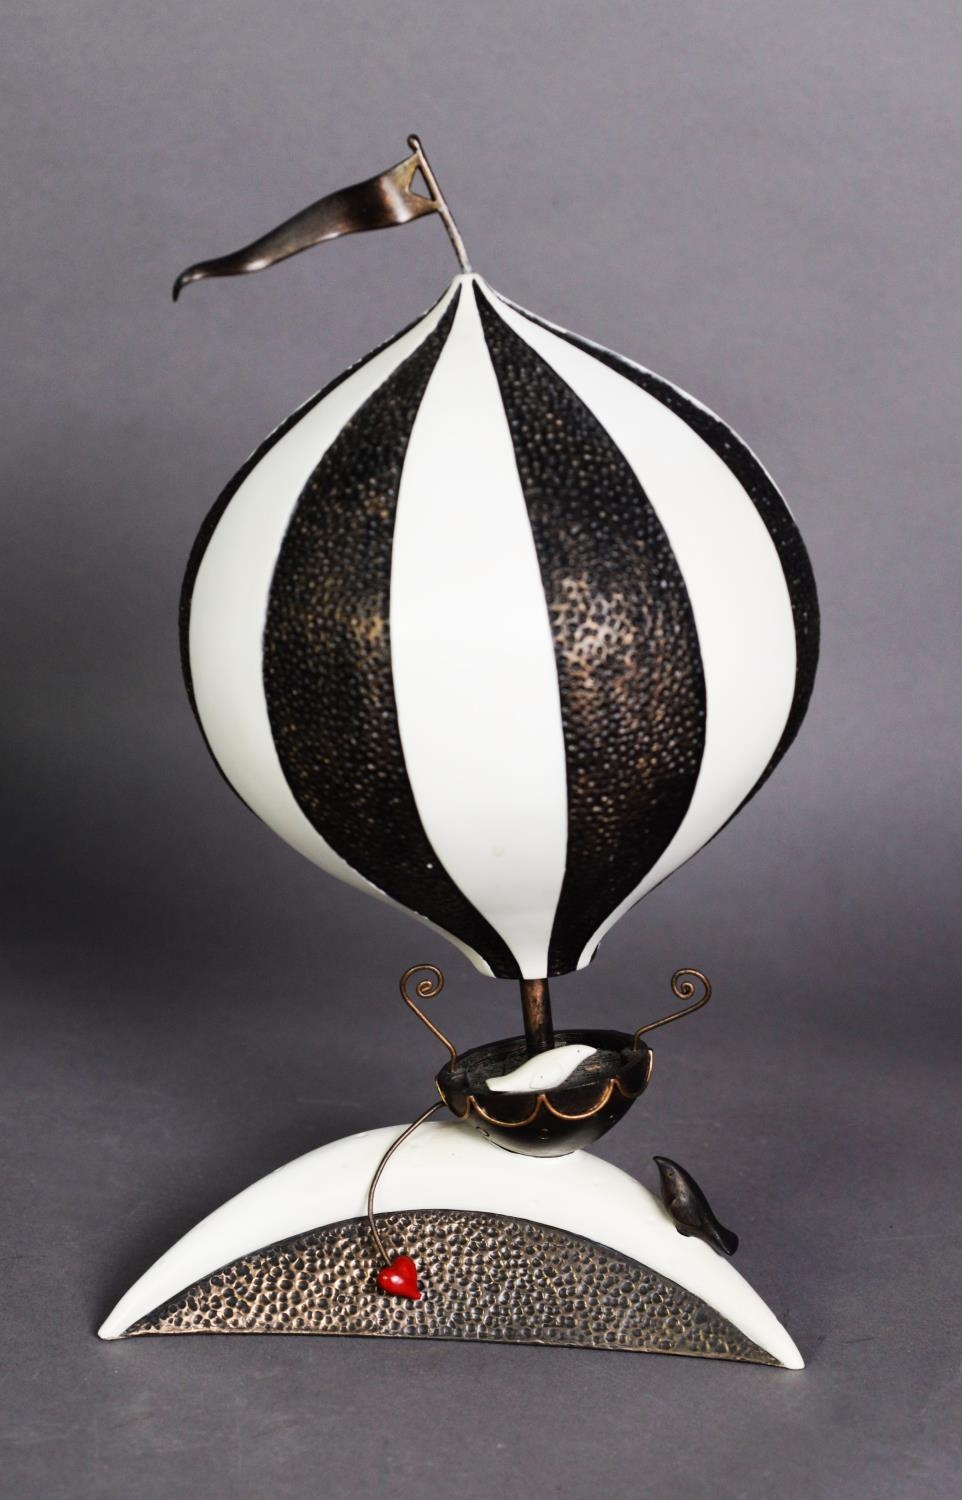 ADAM BARSBY (b.1969), ltd. ed. cold cast sculpture 'Love's Journey I' of a hot air balloon, numbered